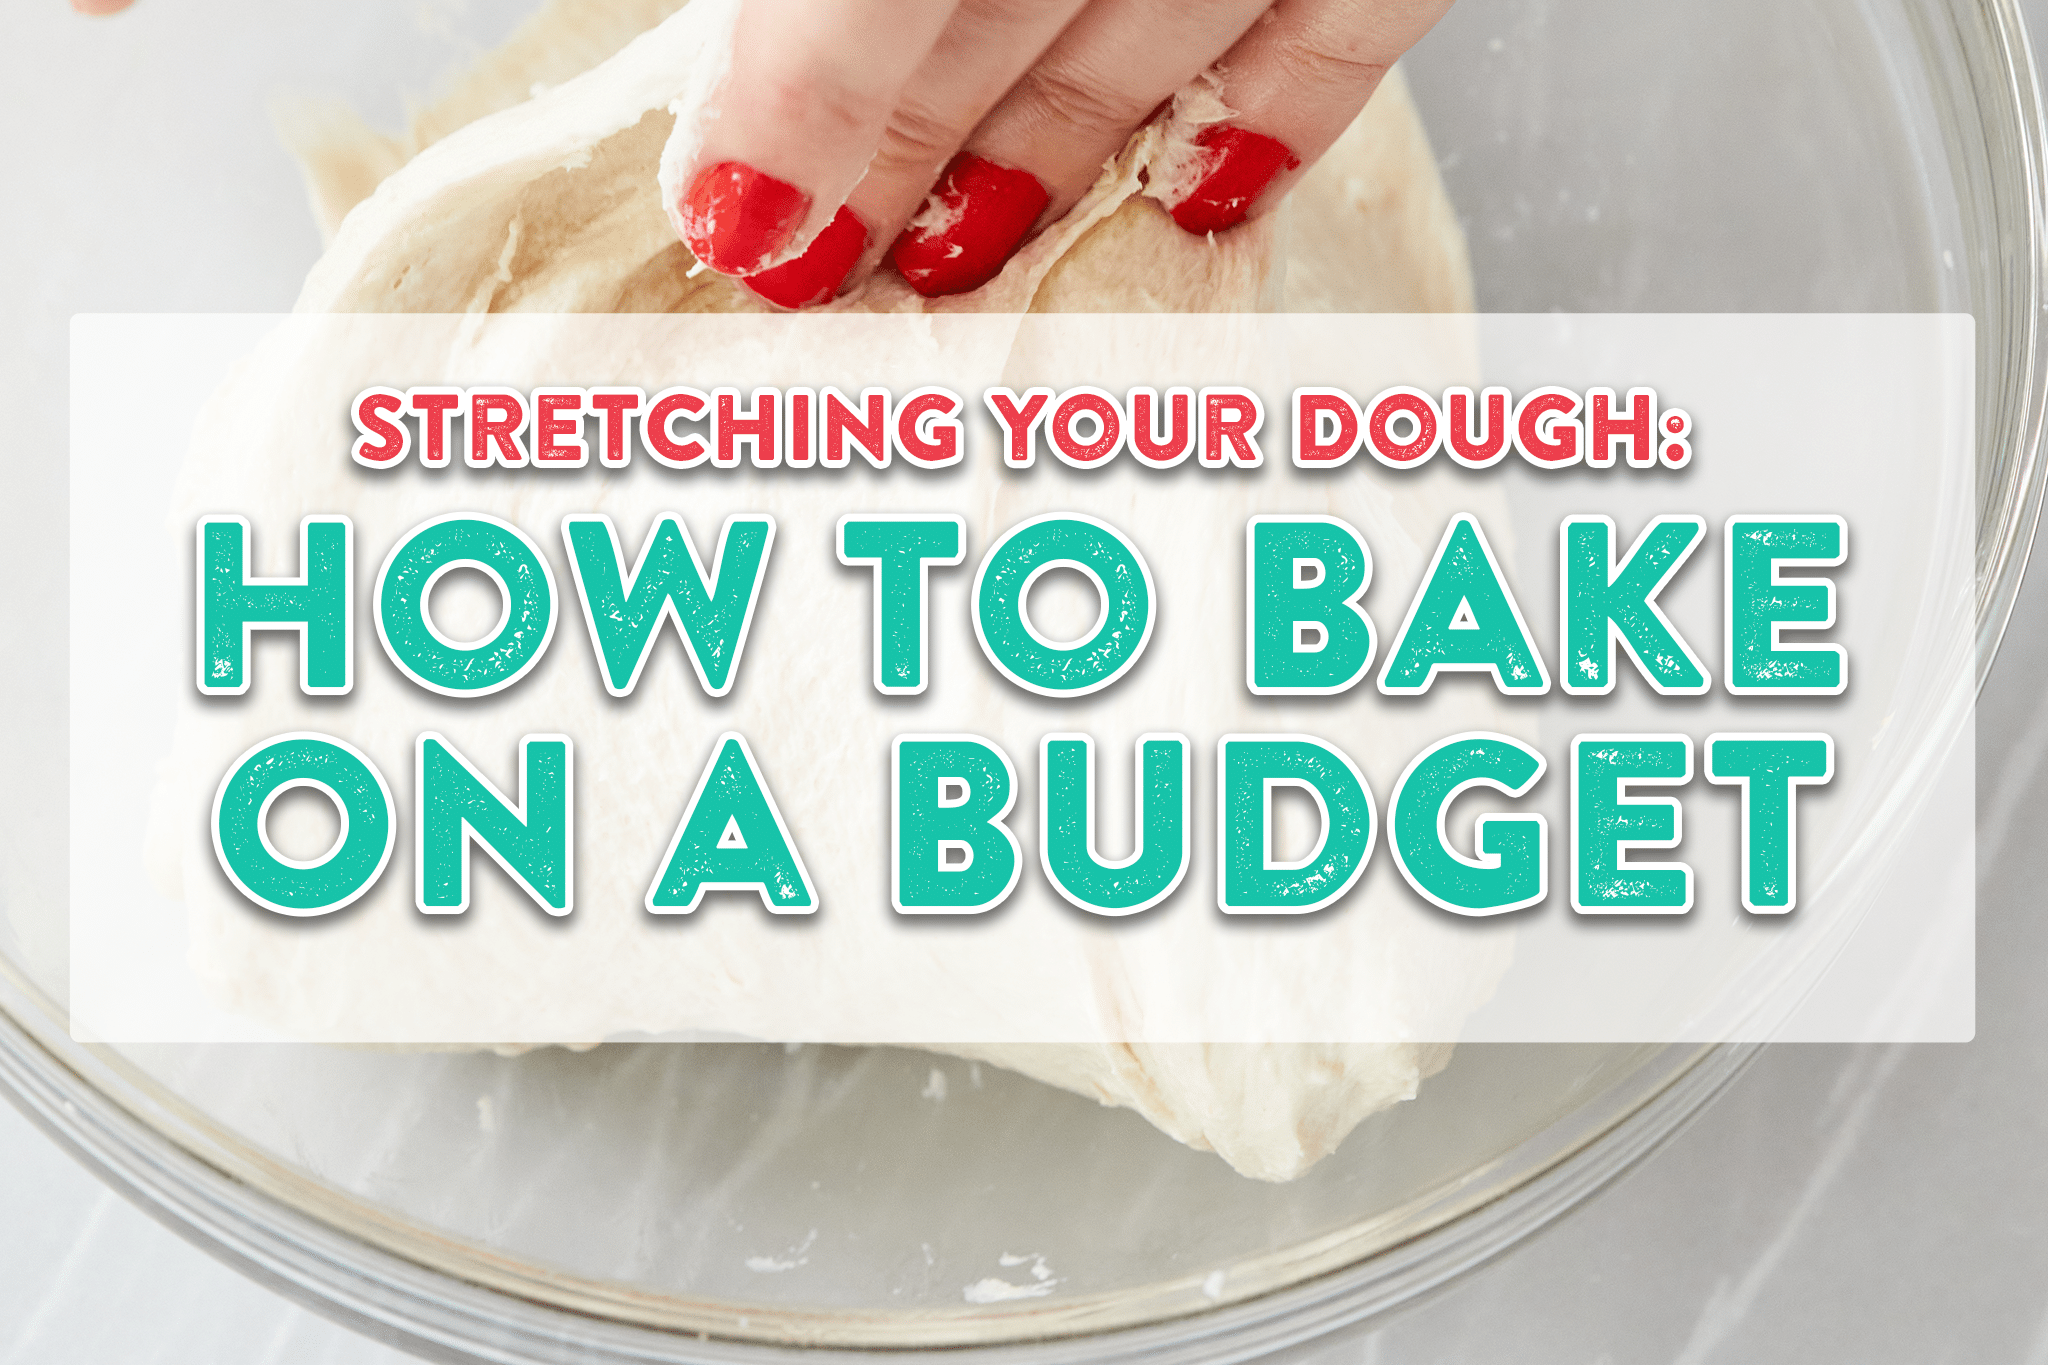 A glass bowl with a hand kneading dough with text "Stretching Your Dough: How to Bake on a Budget" overlaid.